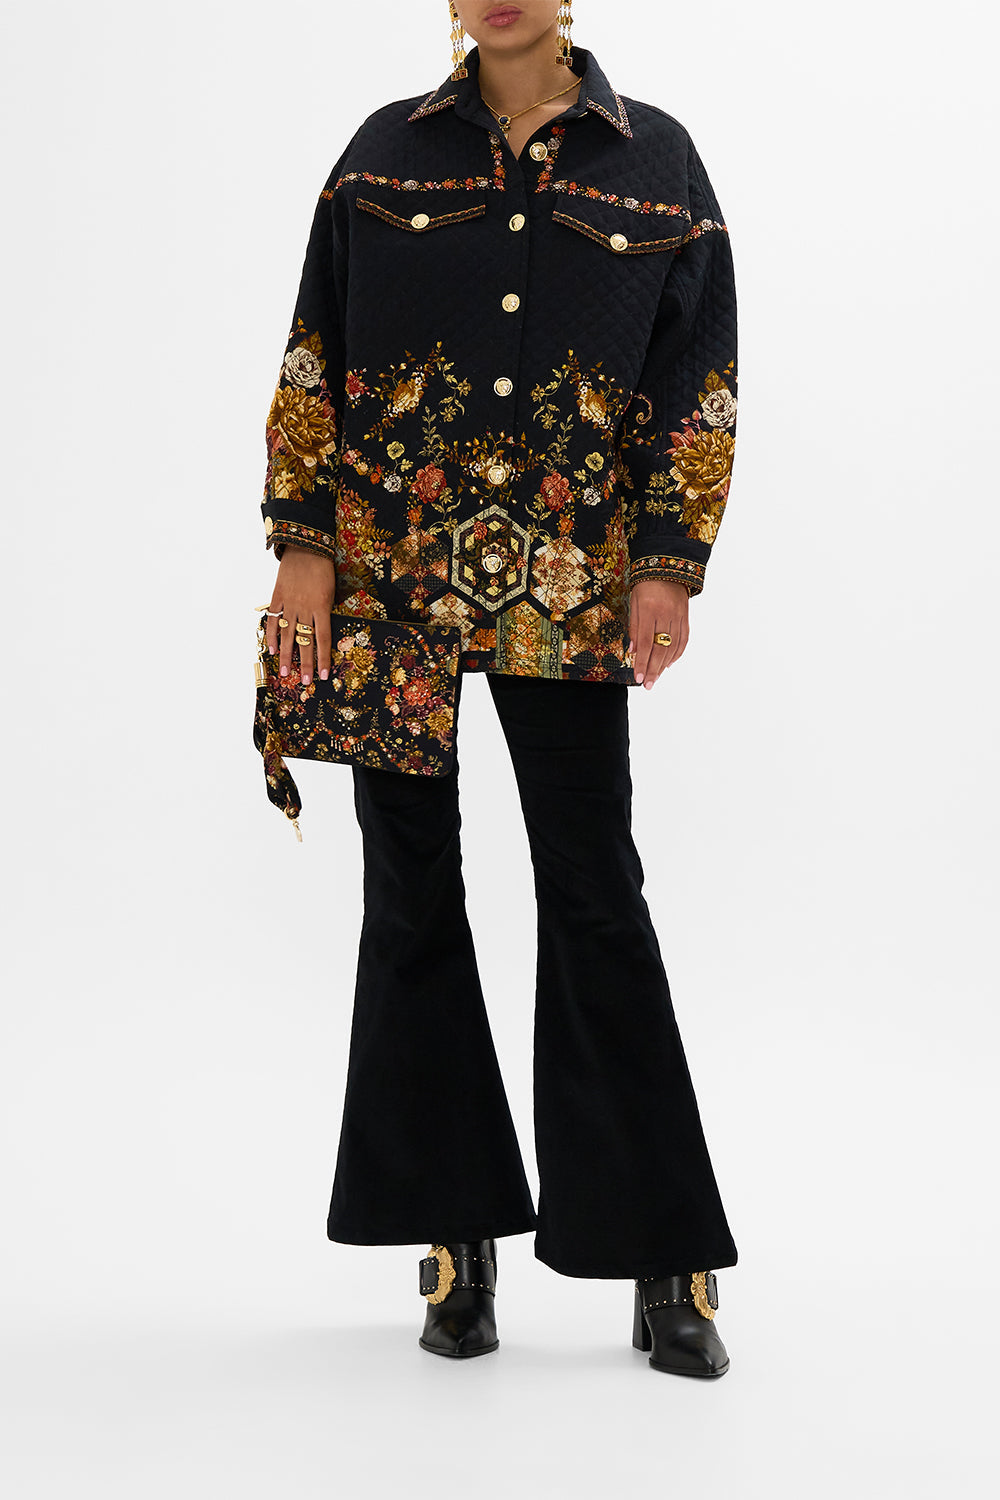 CAMILLA Floral Long Dress With Gathered Bell Sleeve in Stitched In Time print.